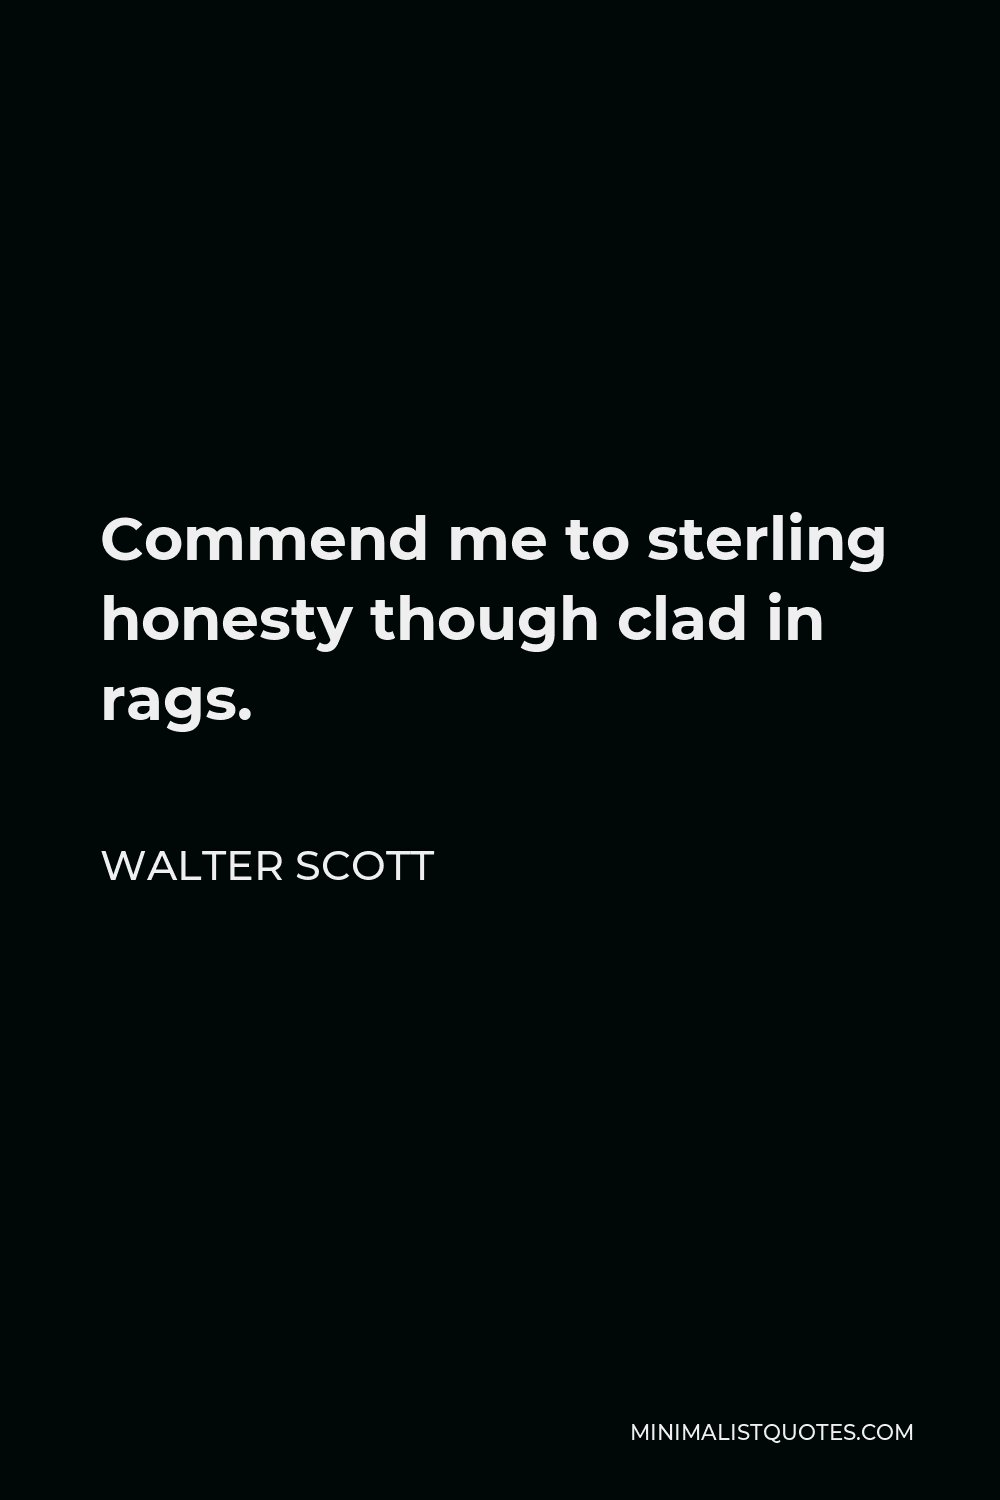 Walter Scott Quote - Commend me to sterling honesty though clad in rags.